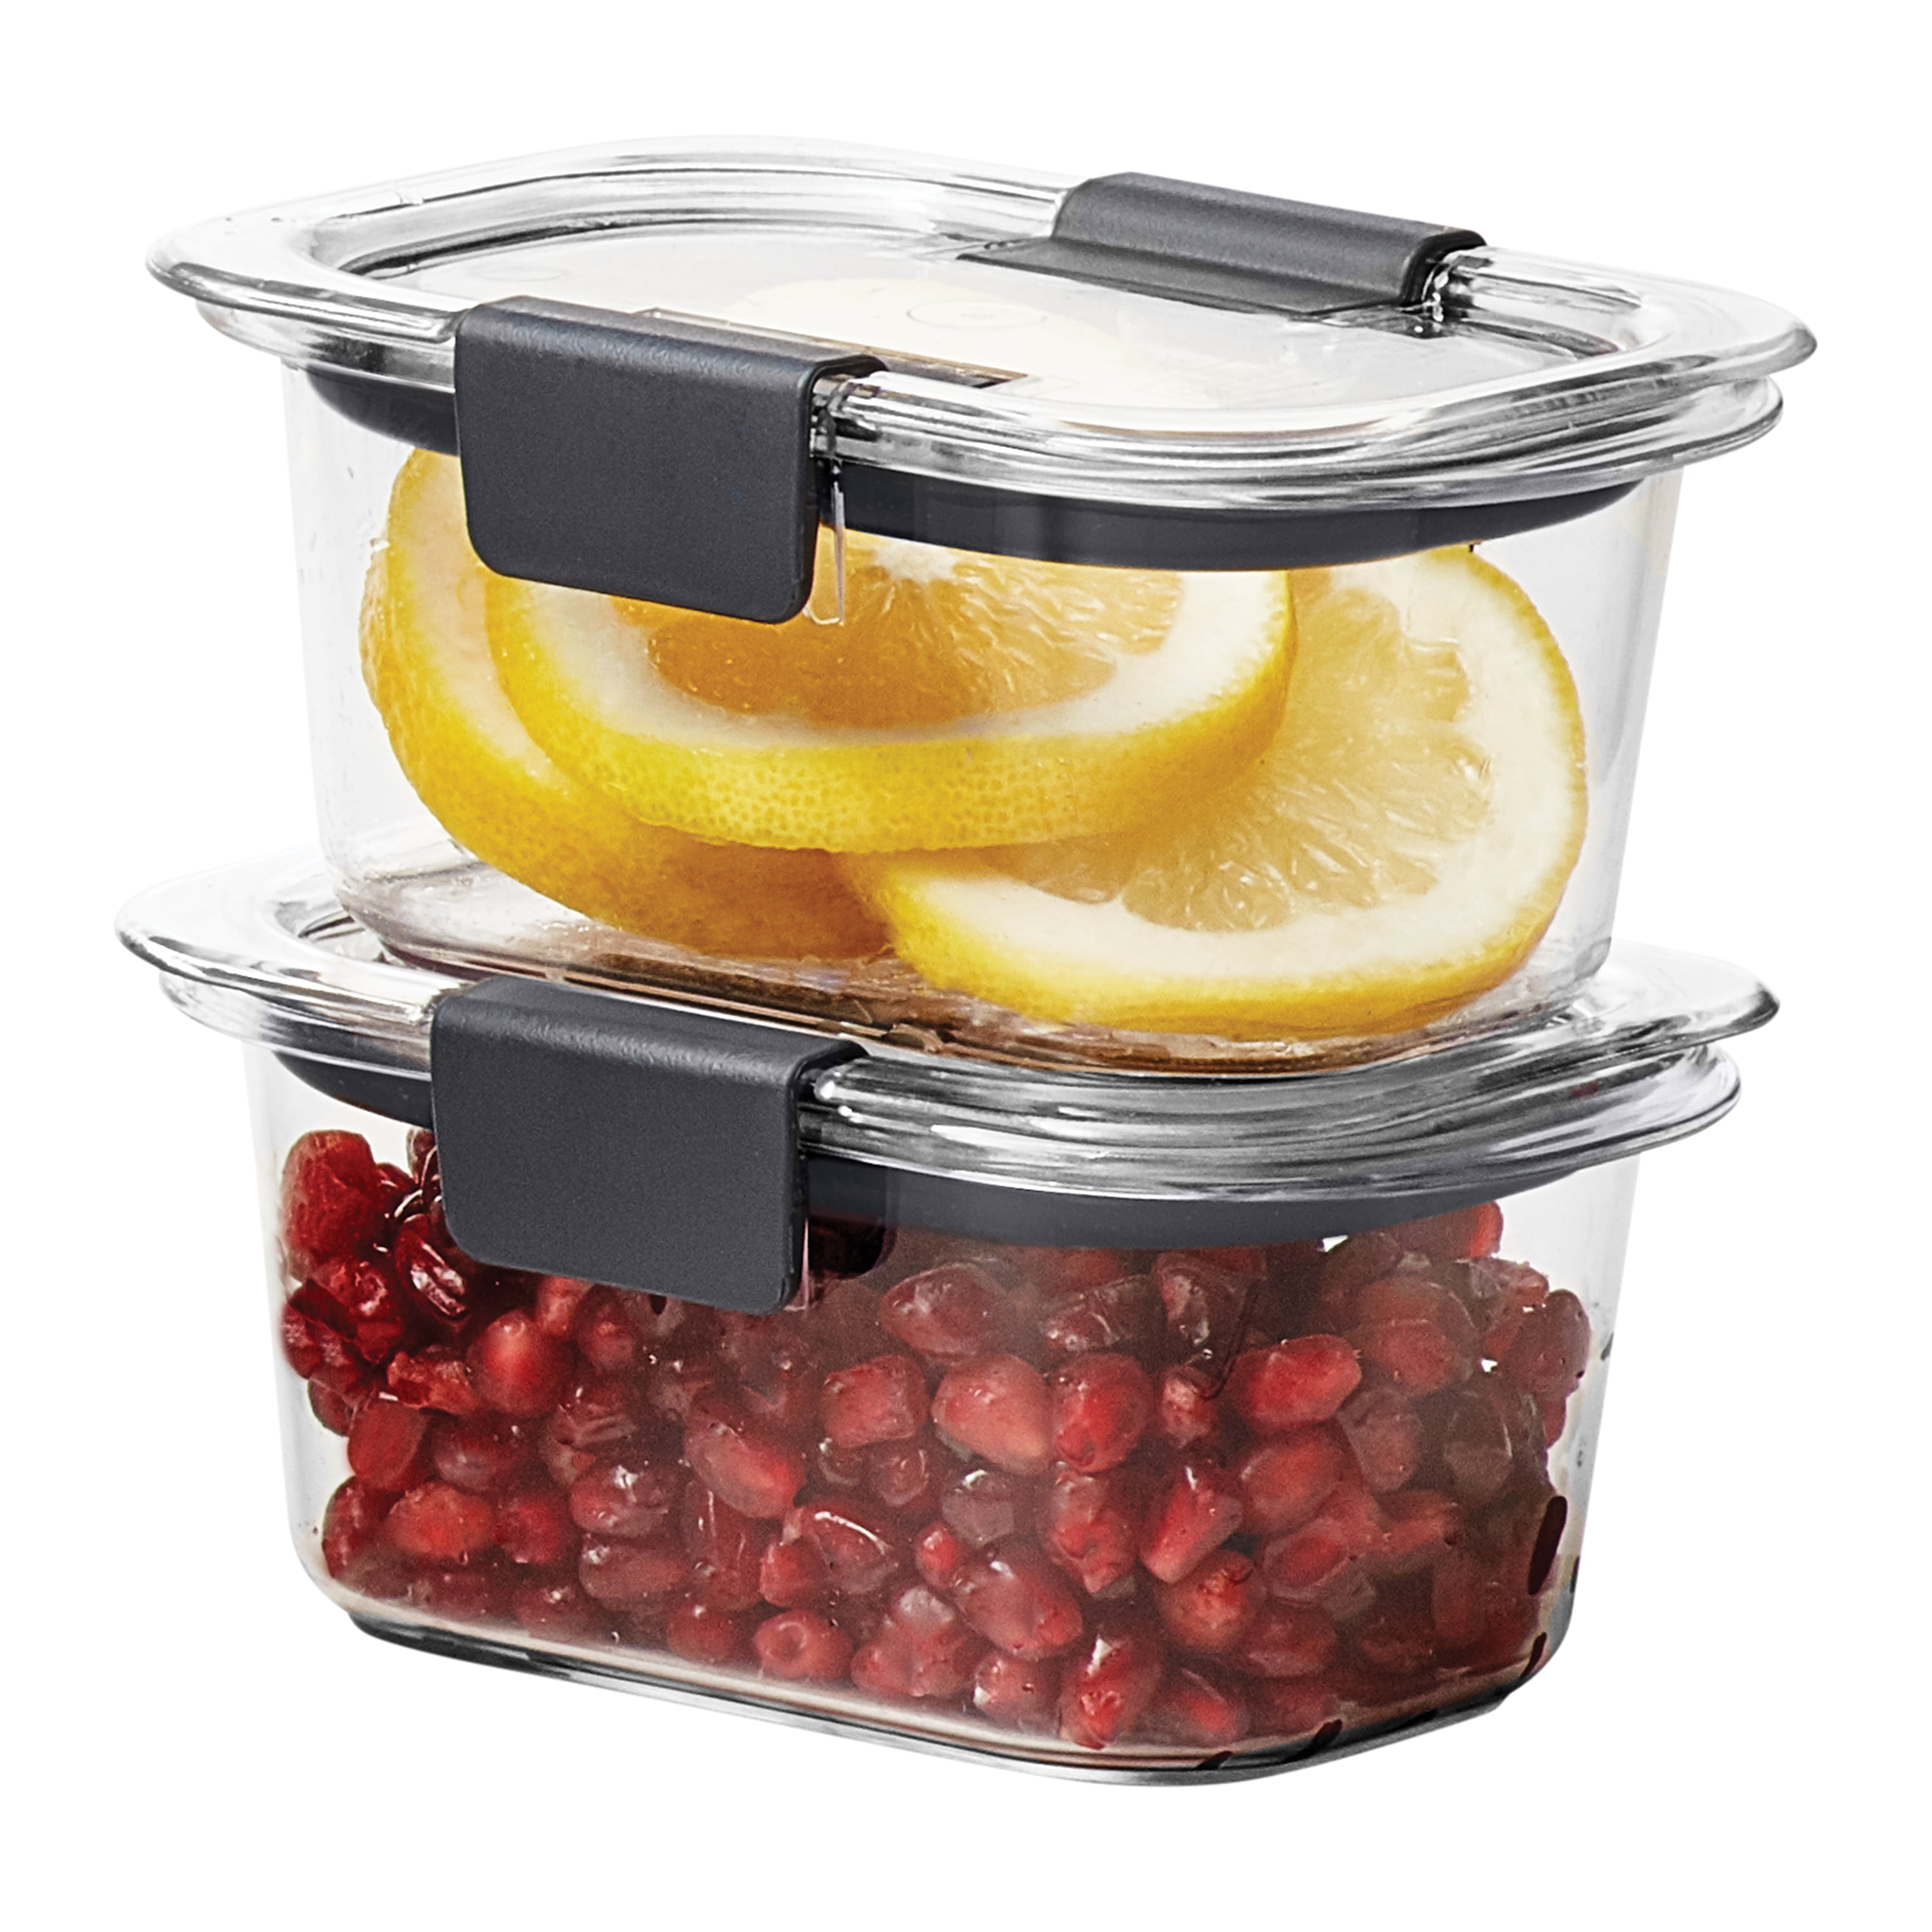 Rubbermaid Brilliance Food Storage Containers, 12 Piece Sandwich and Salad Lunch Kit, Leak-Proof, BPA Free, Clear Tritan Plastic